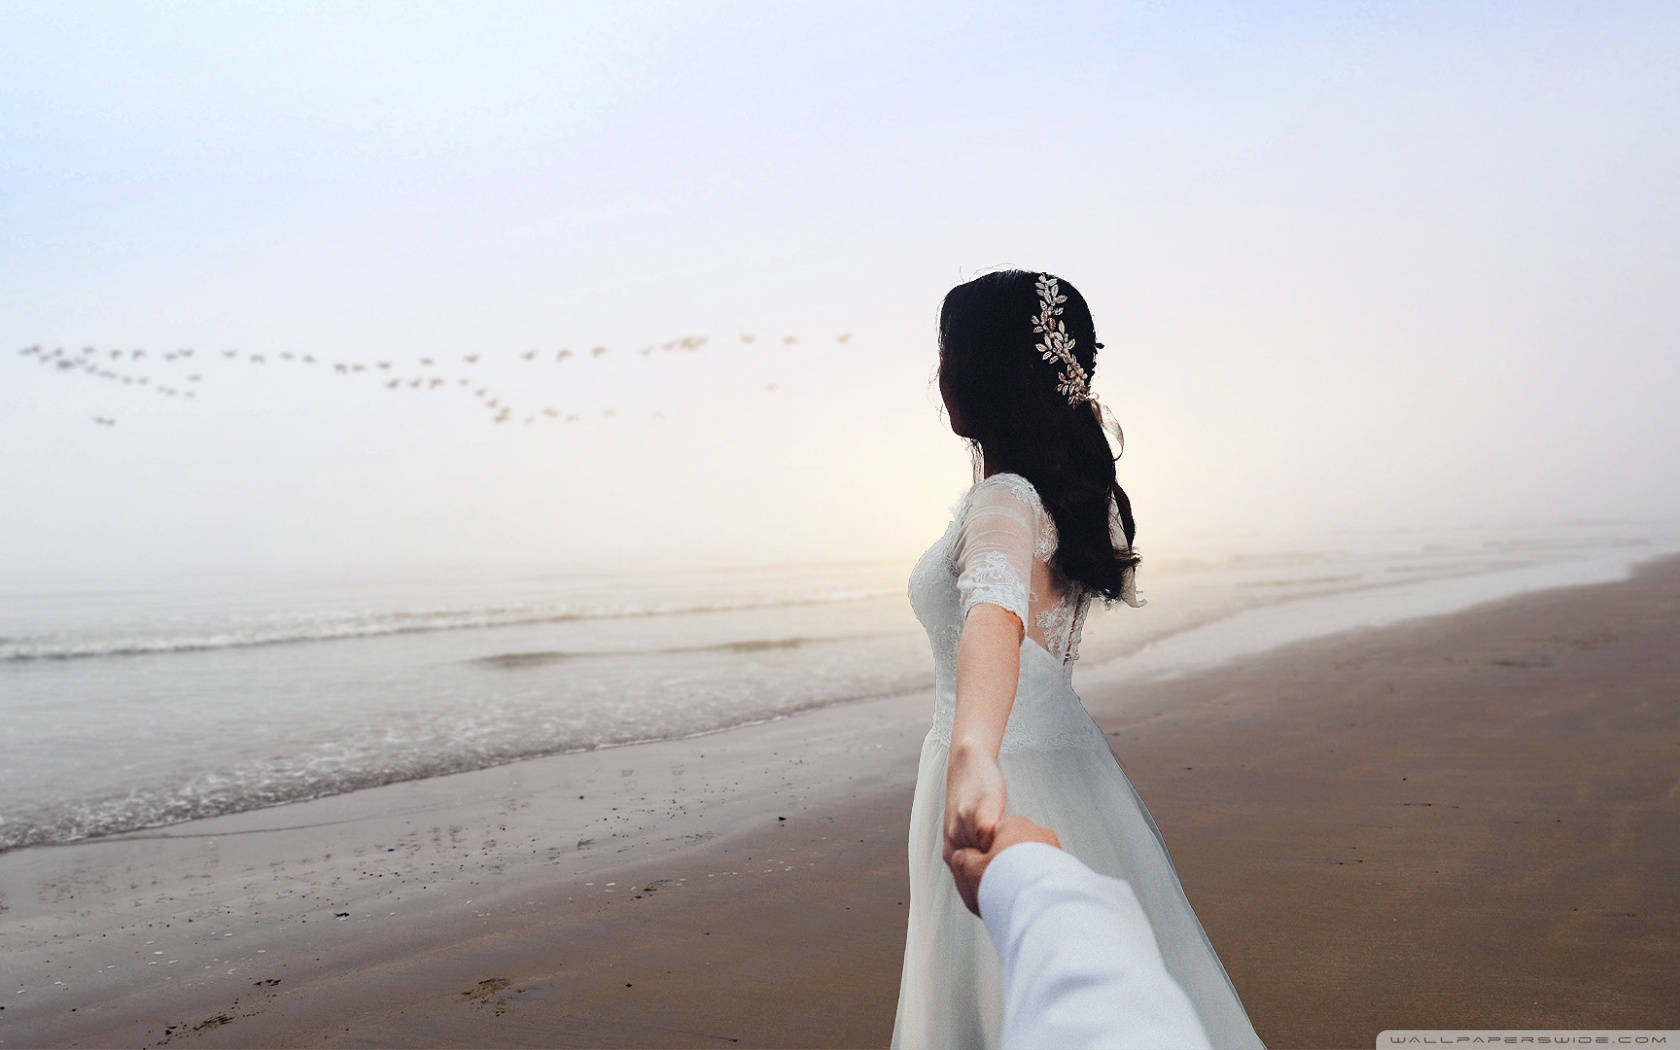 Holding Hands By The Beach In Wedding Gown